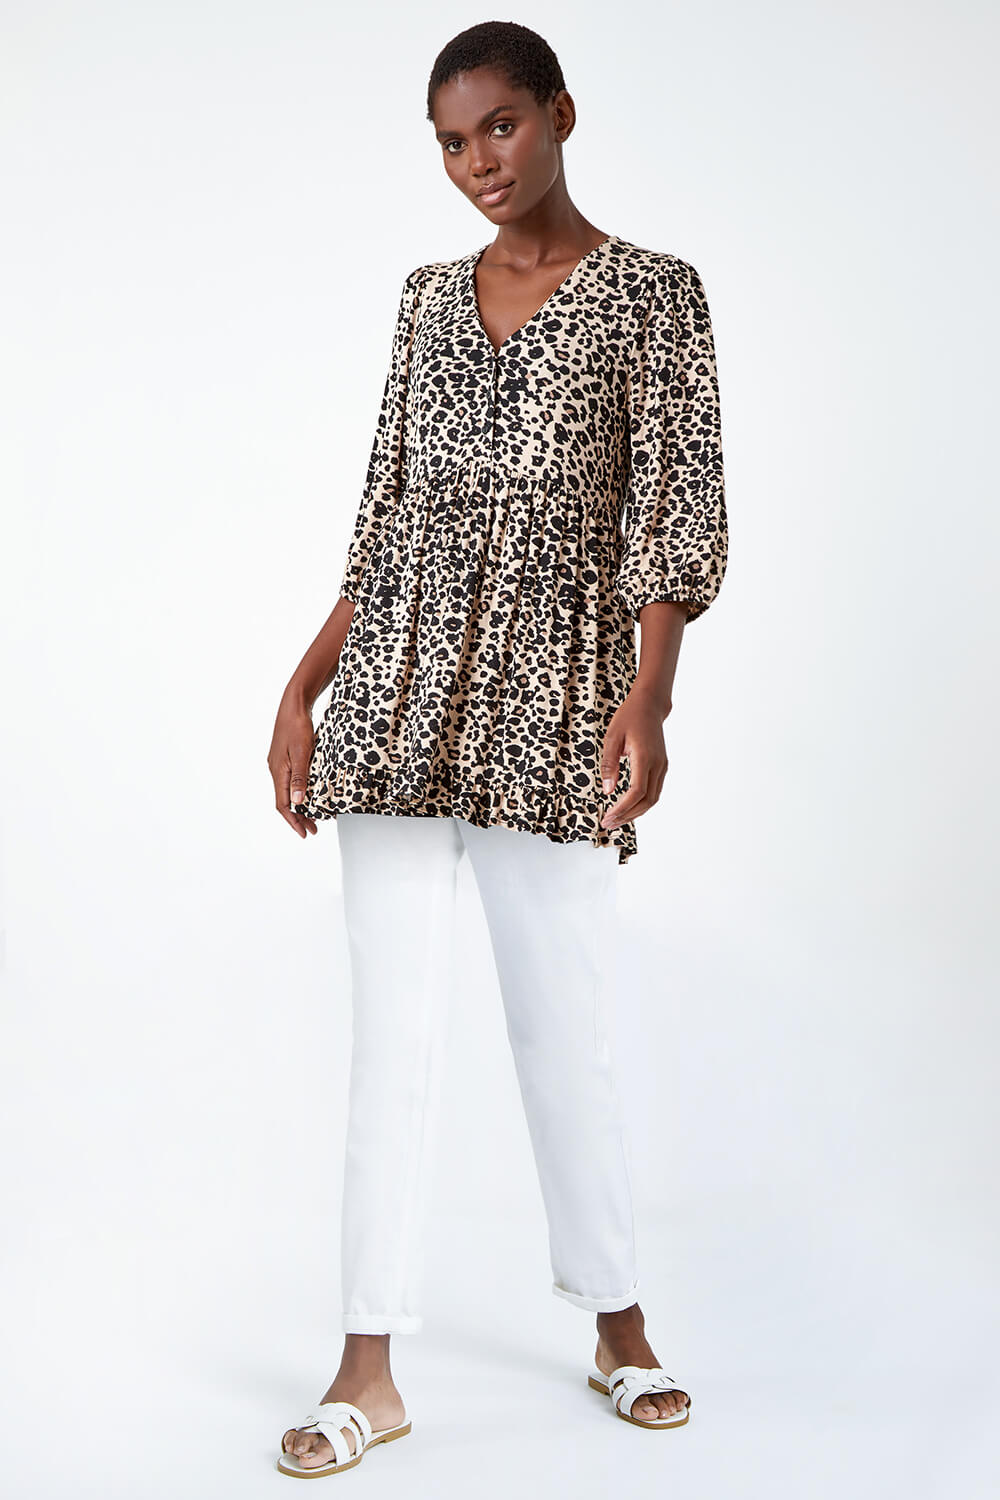 Neutral Animal Print Stretch Tunic Top, Image 2 of 5